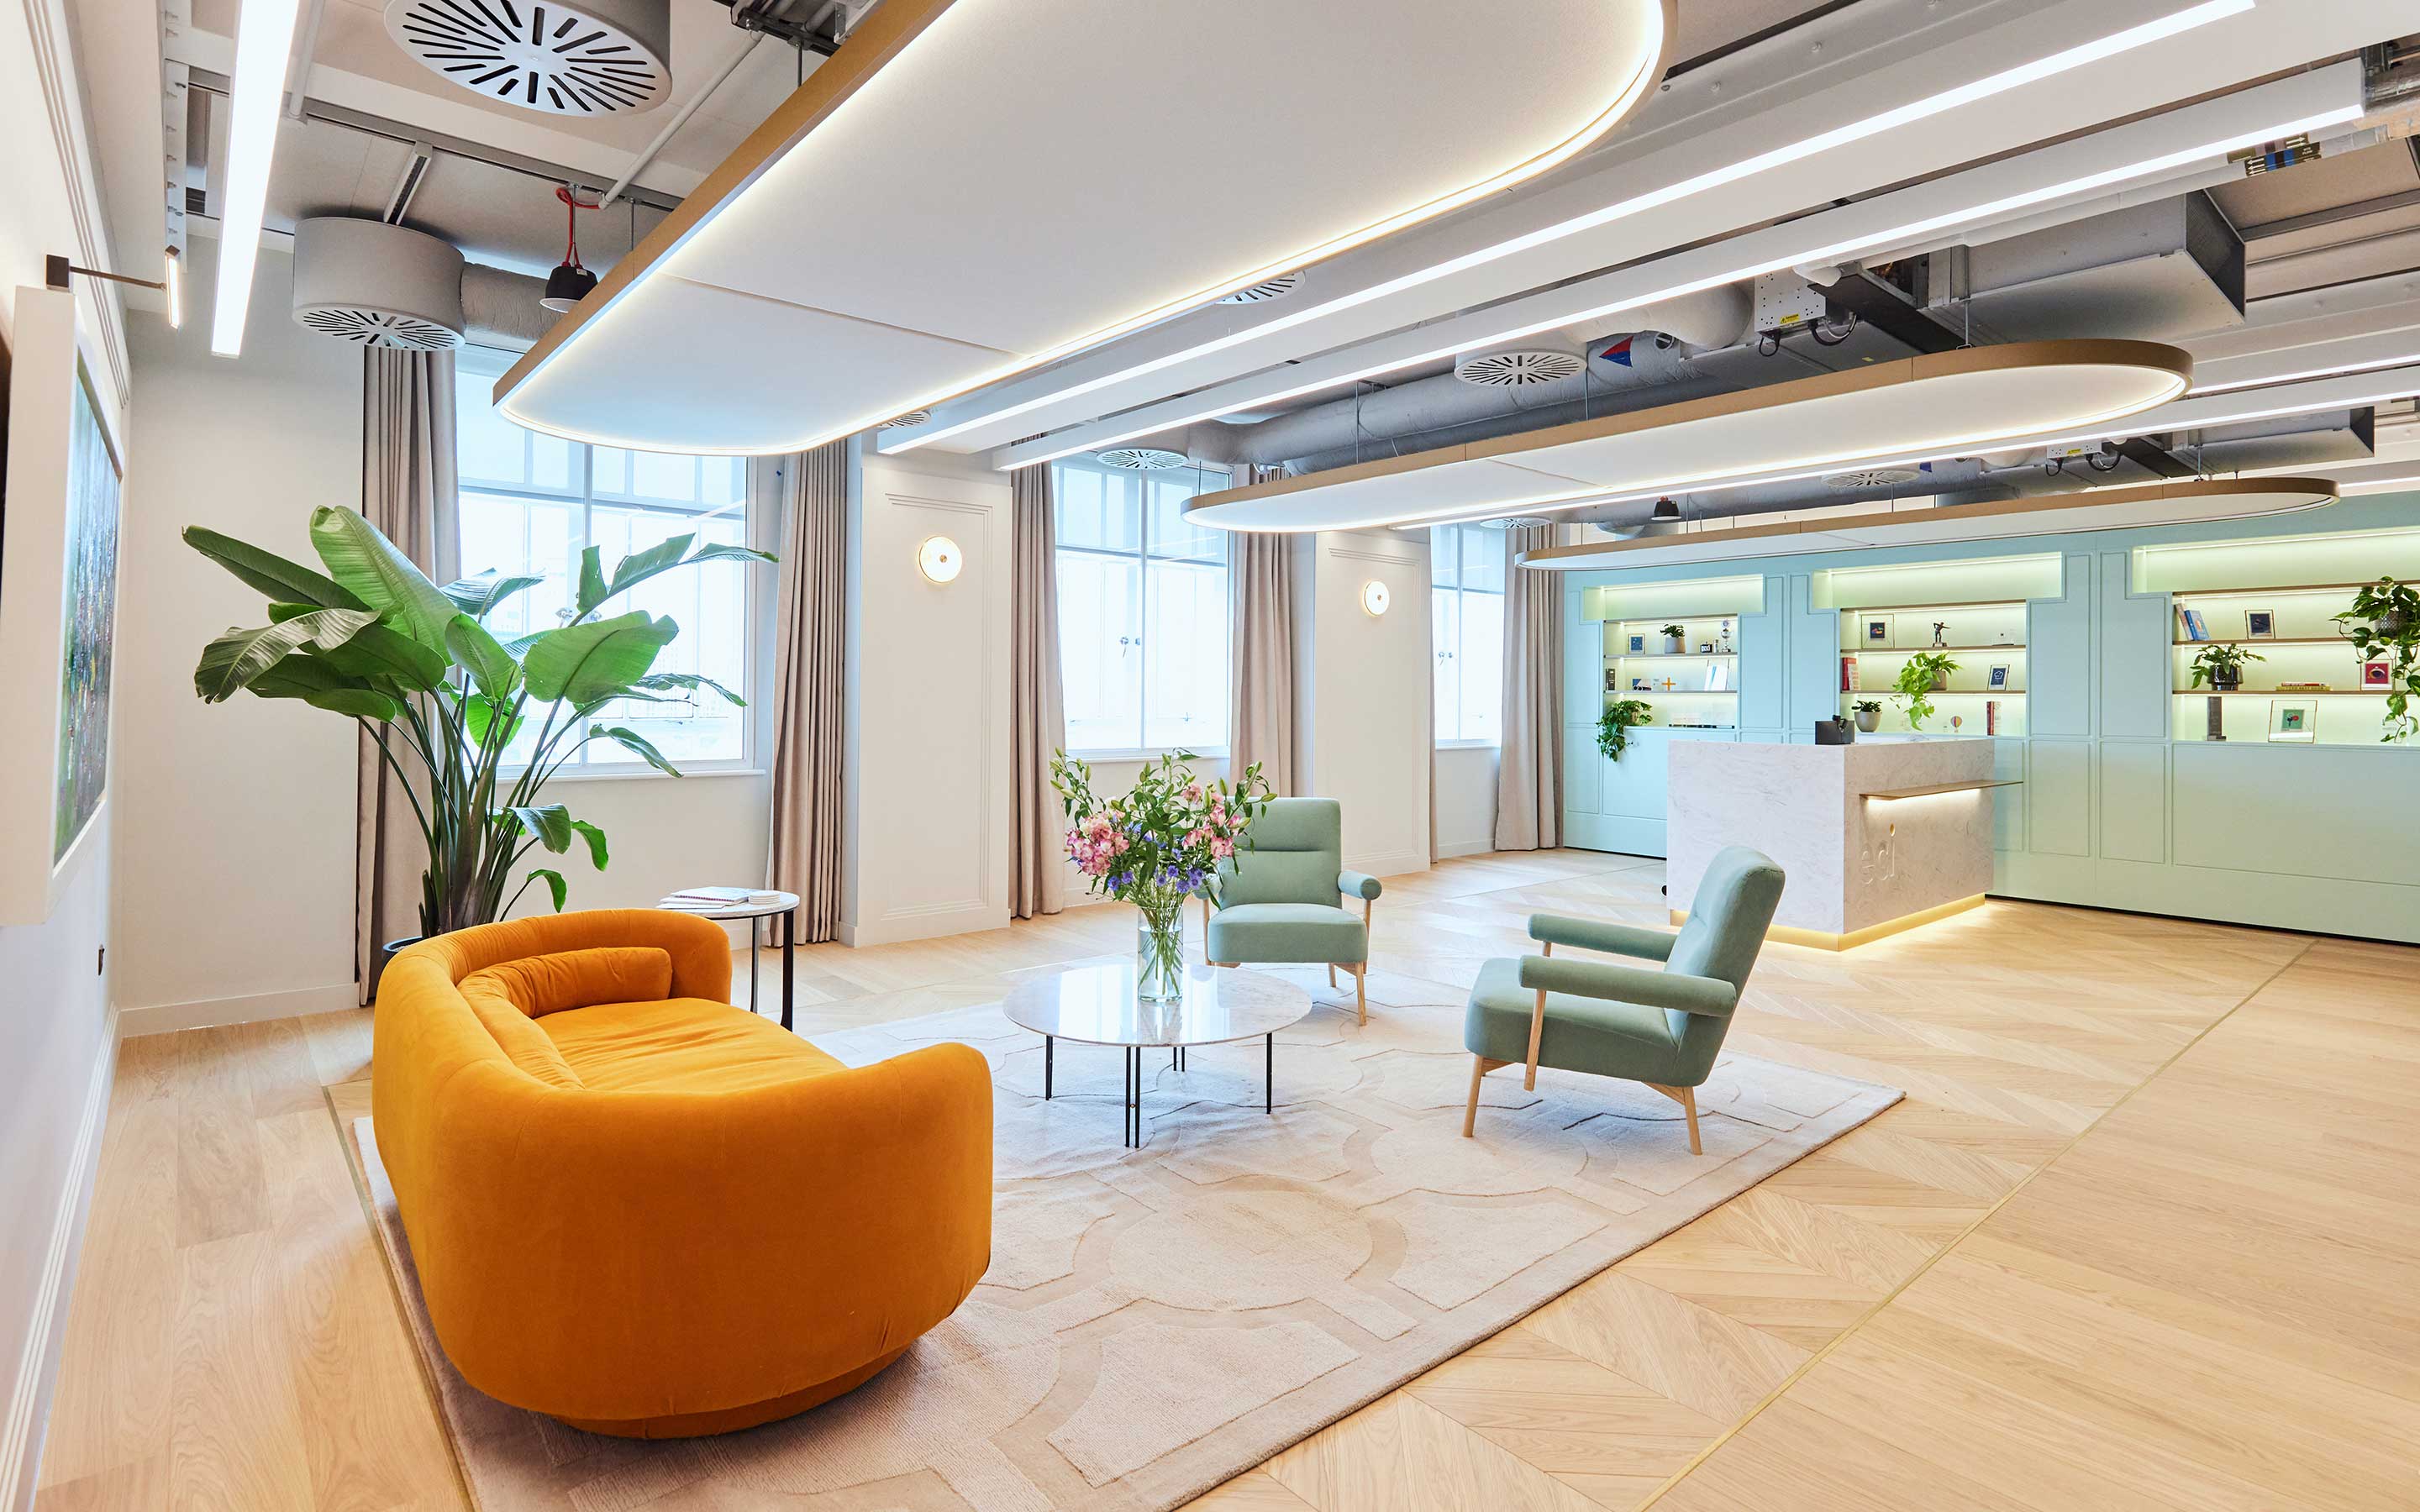 A brightly lit office reception area with a velvet yellow sofa, exposed ceiling services, and a marble reception desk